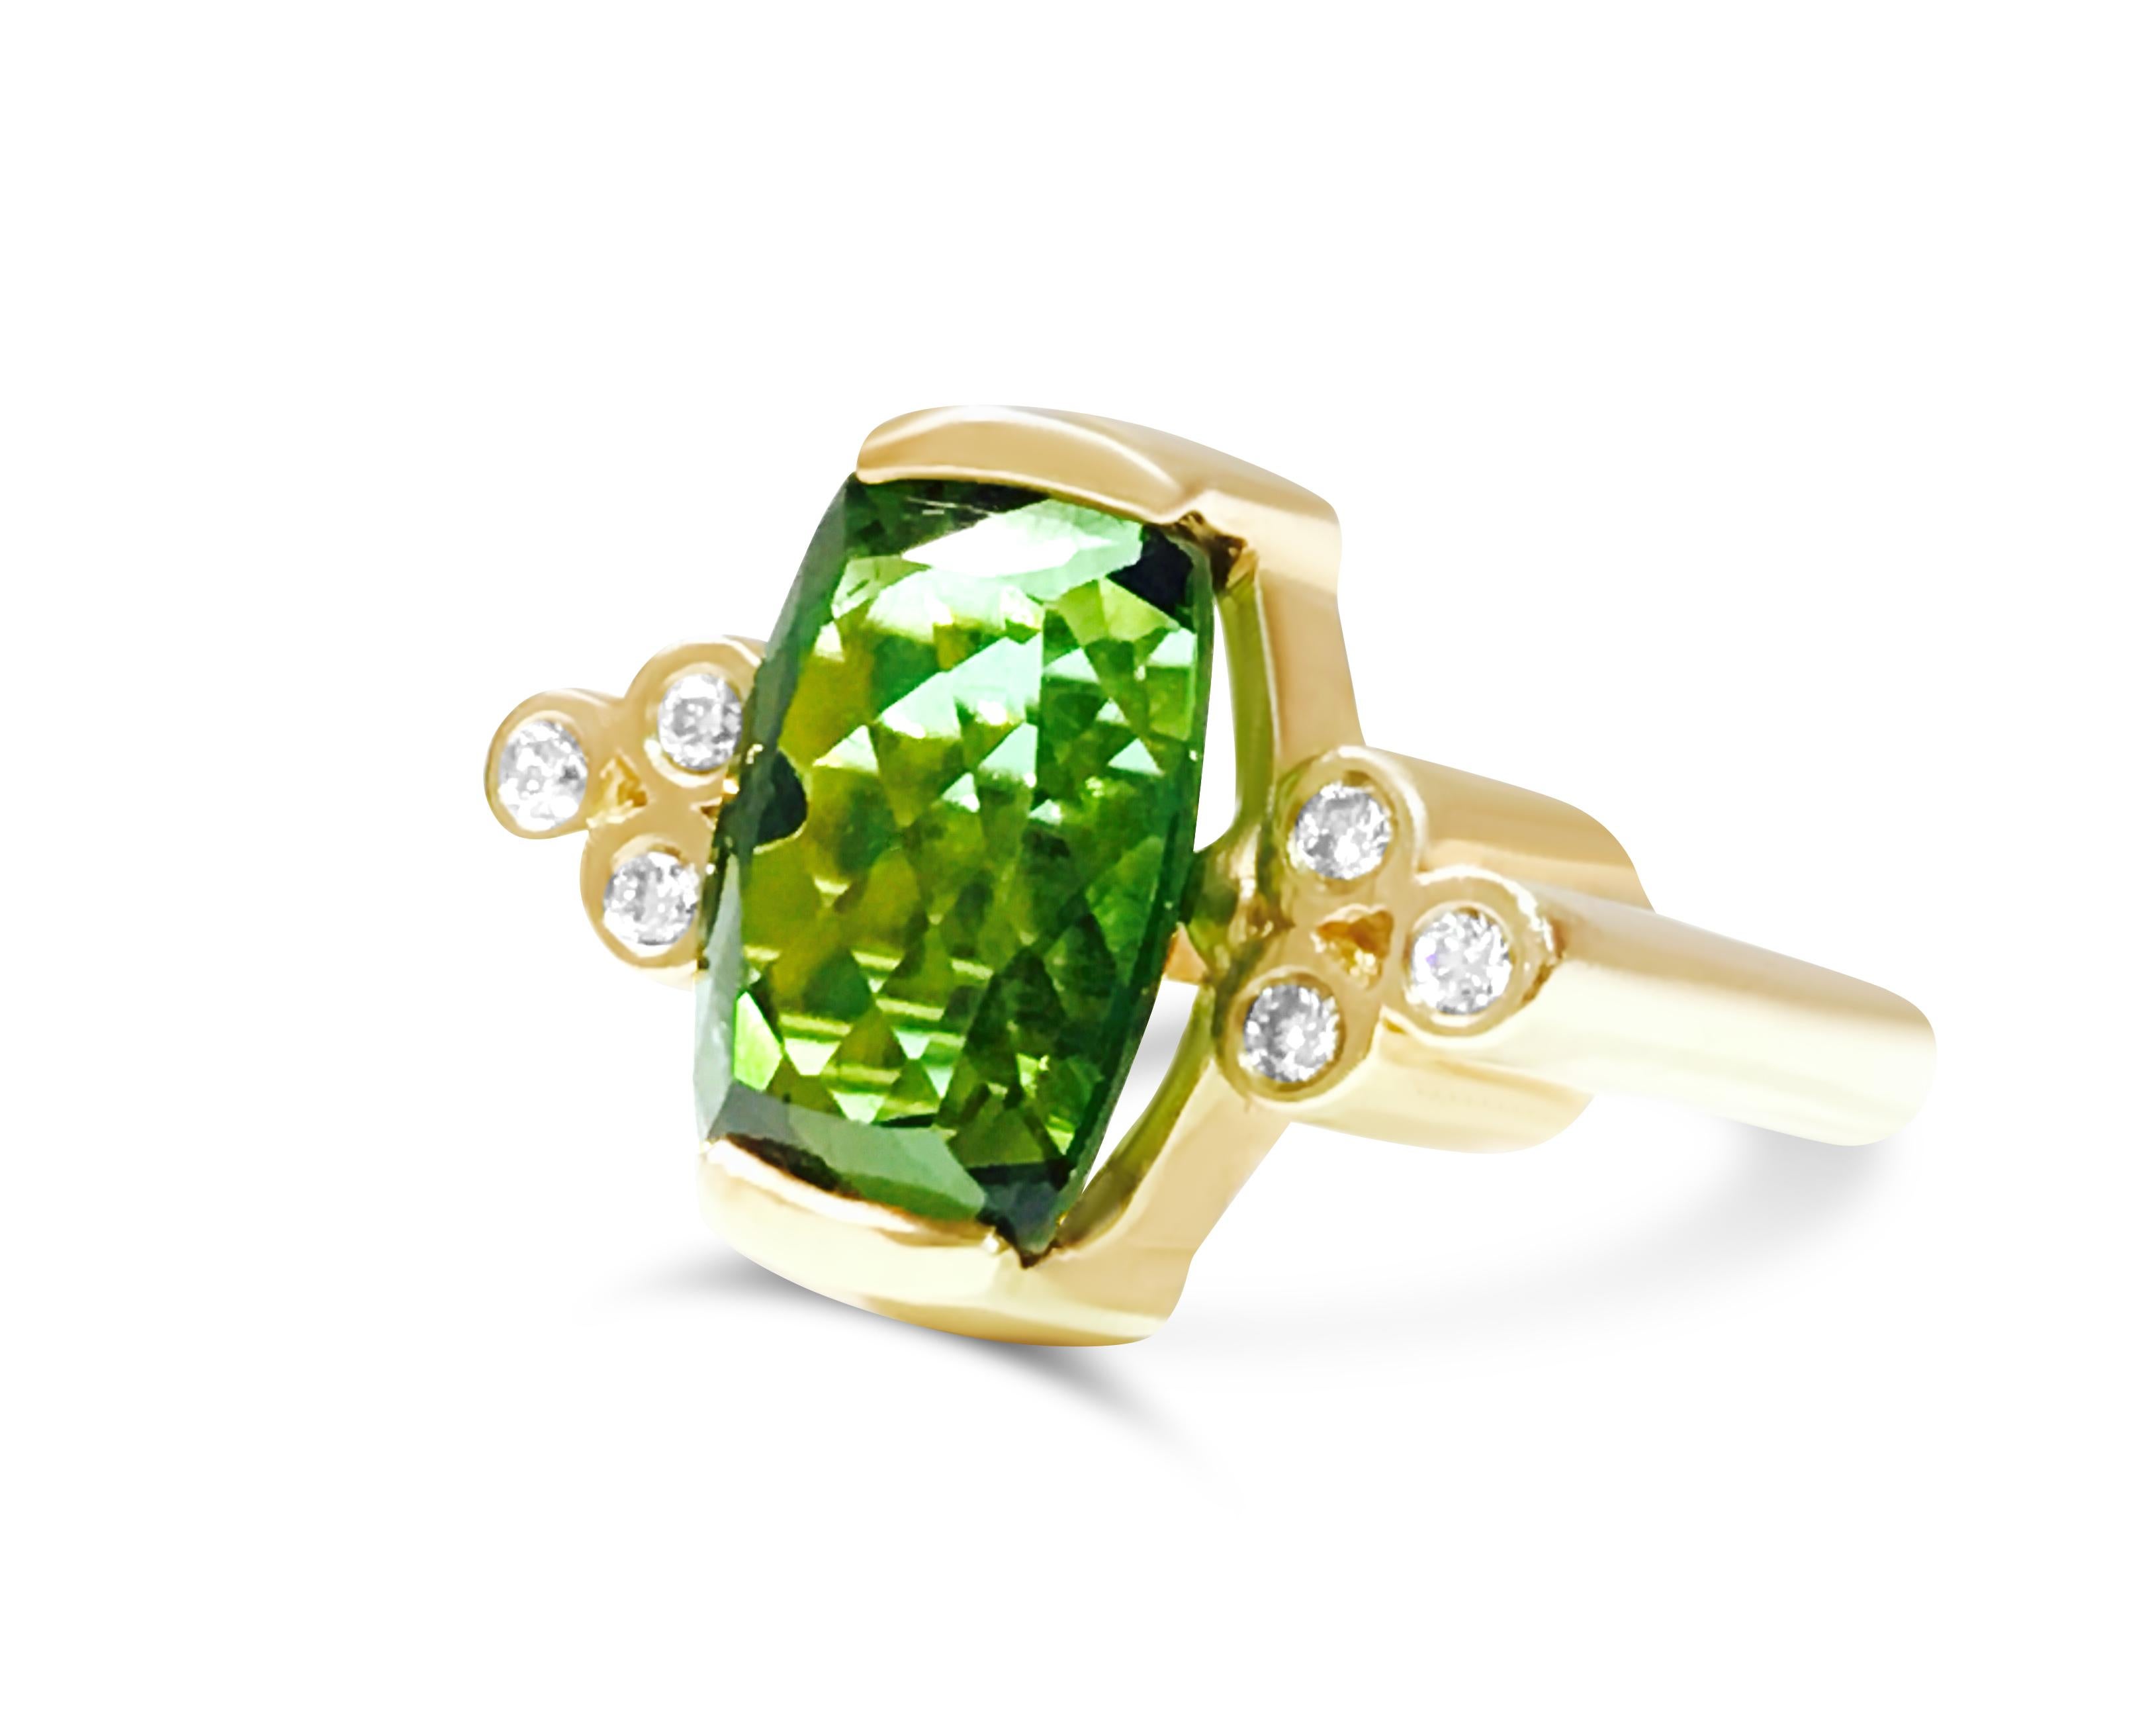 Medieval 14K Yellow Gold, 4.00 CT Green Tourmaline and Diamond Cocktail Ring For Sale